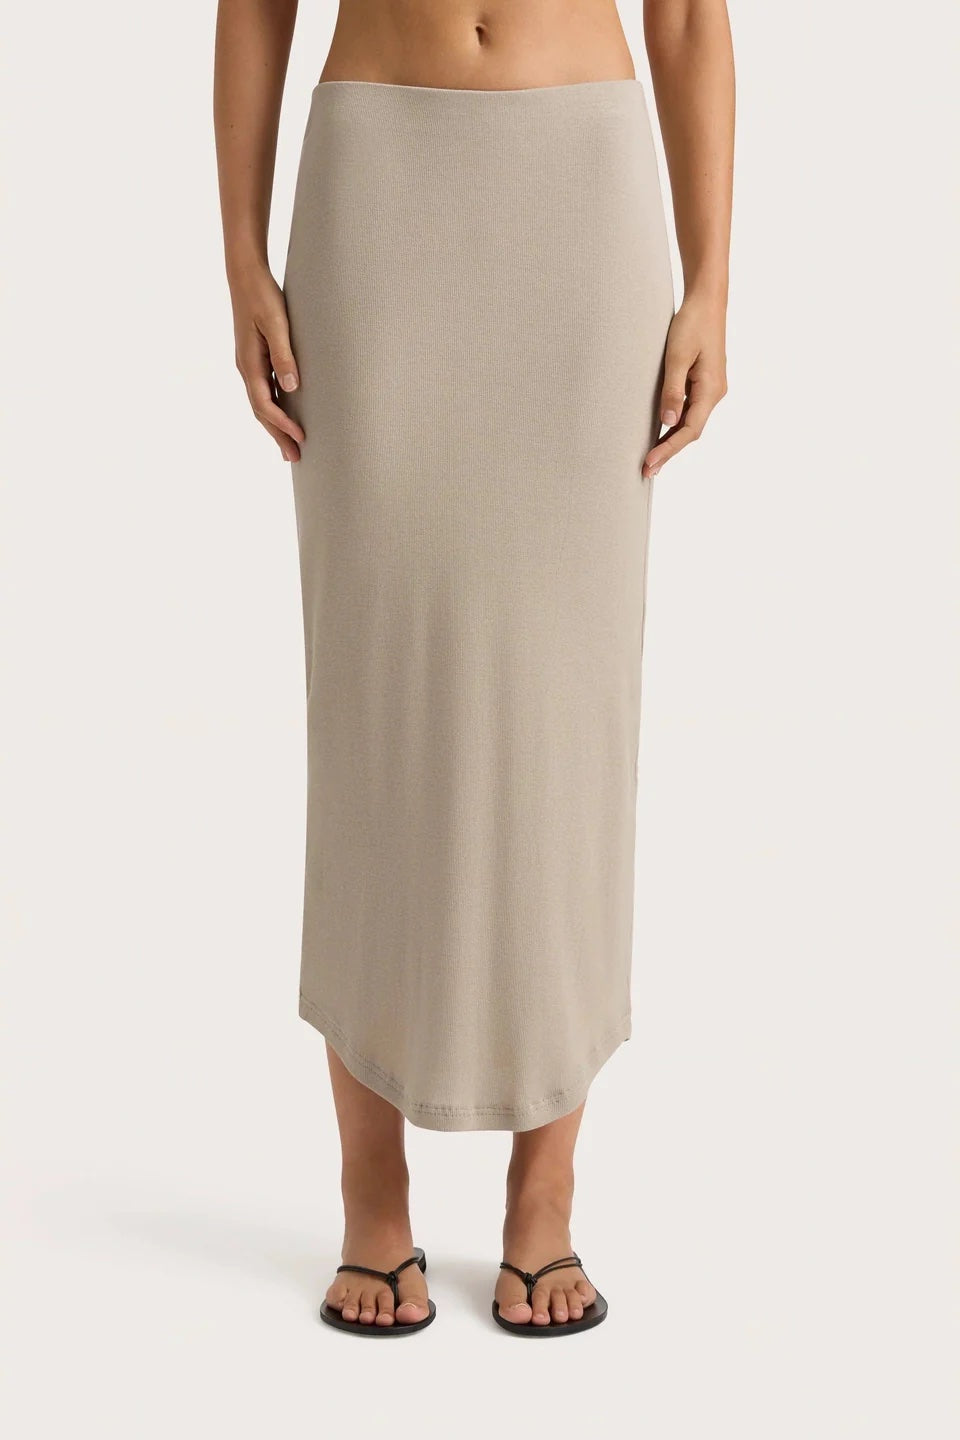 FAITHFULL THE BRAND Loire Skirt in Taupe | The New Trend